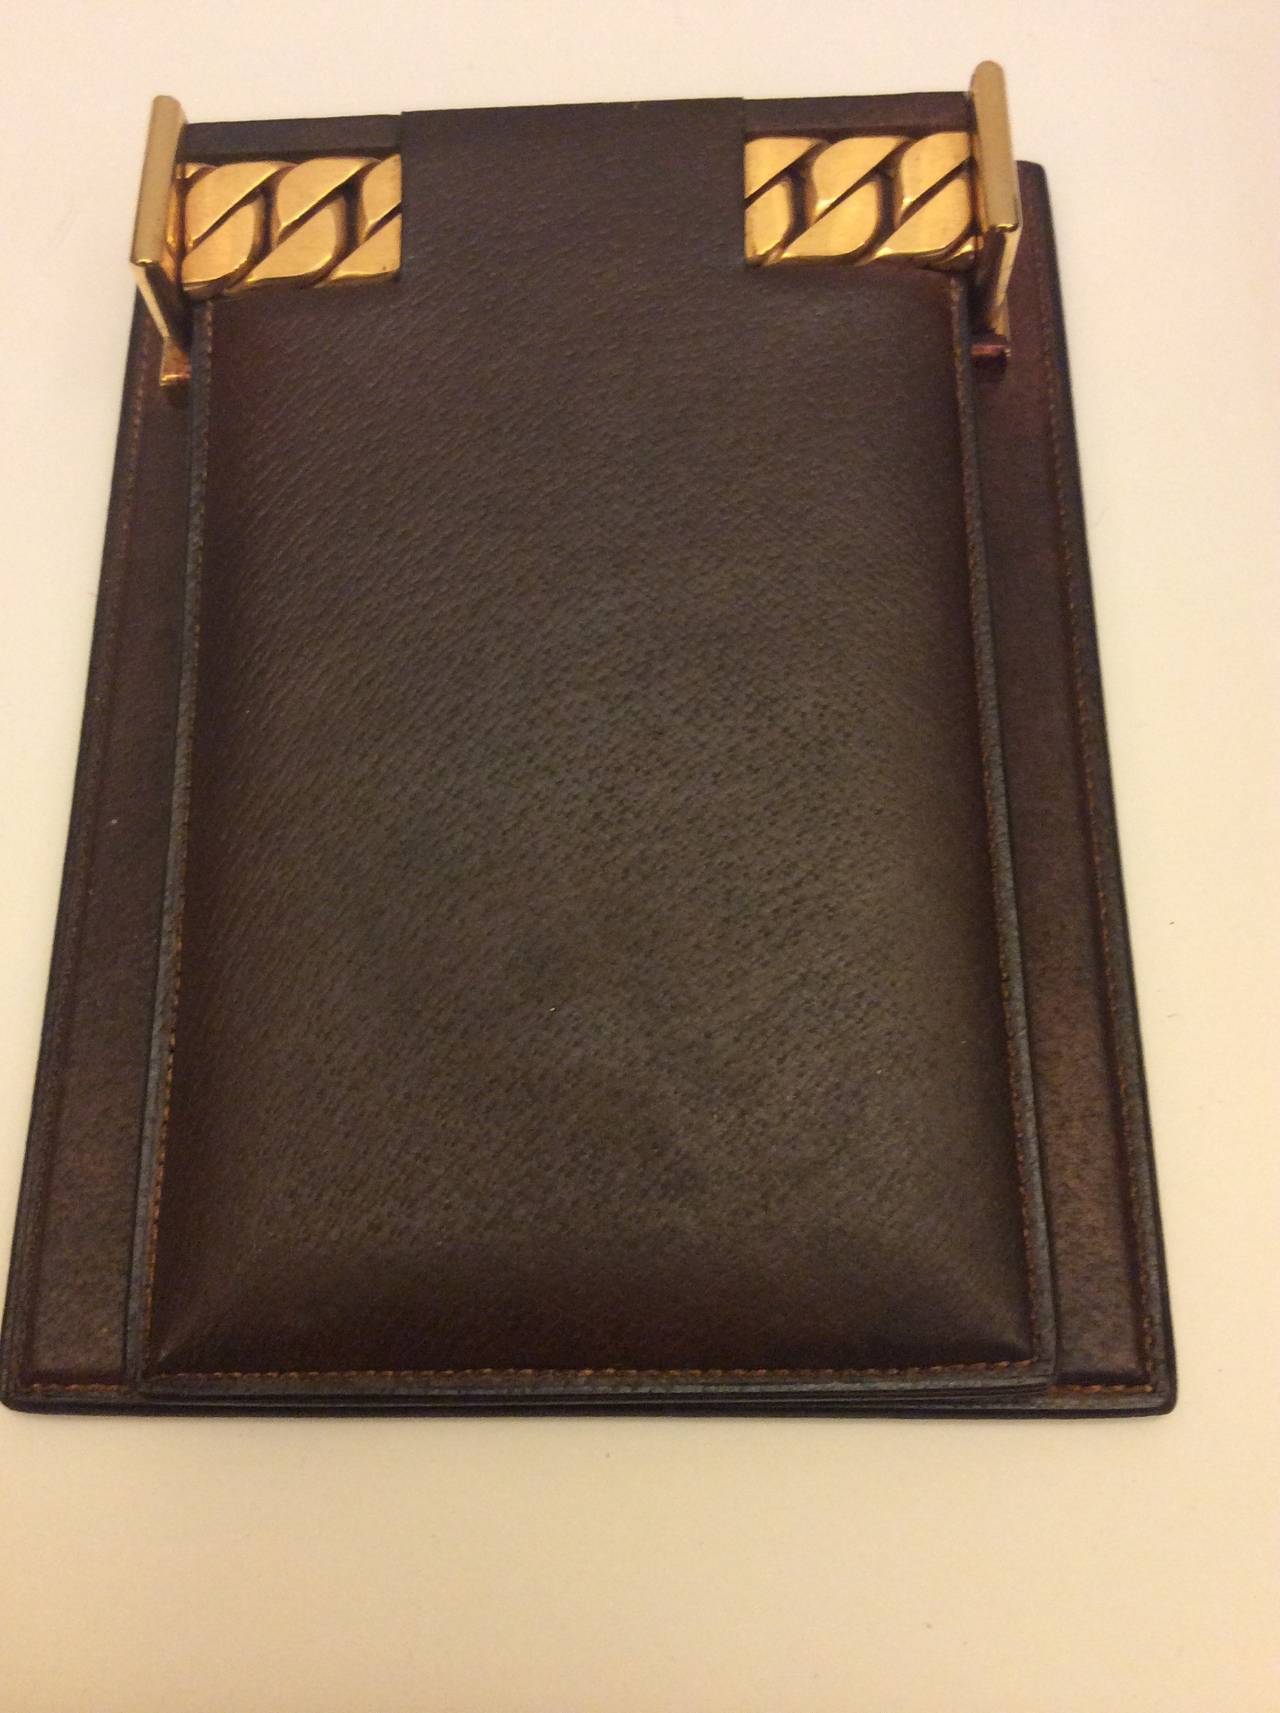 This is a vintage Gucci brown leather Paper-tray and notepad holder with heavy gold chain detail.